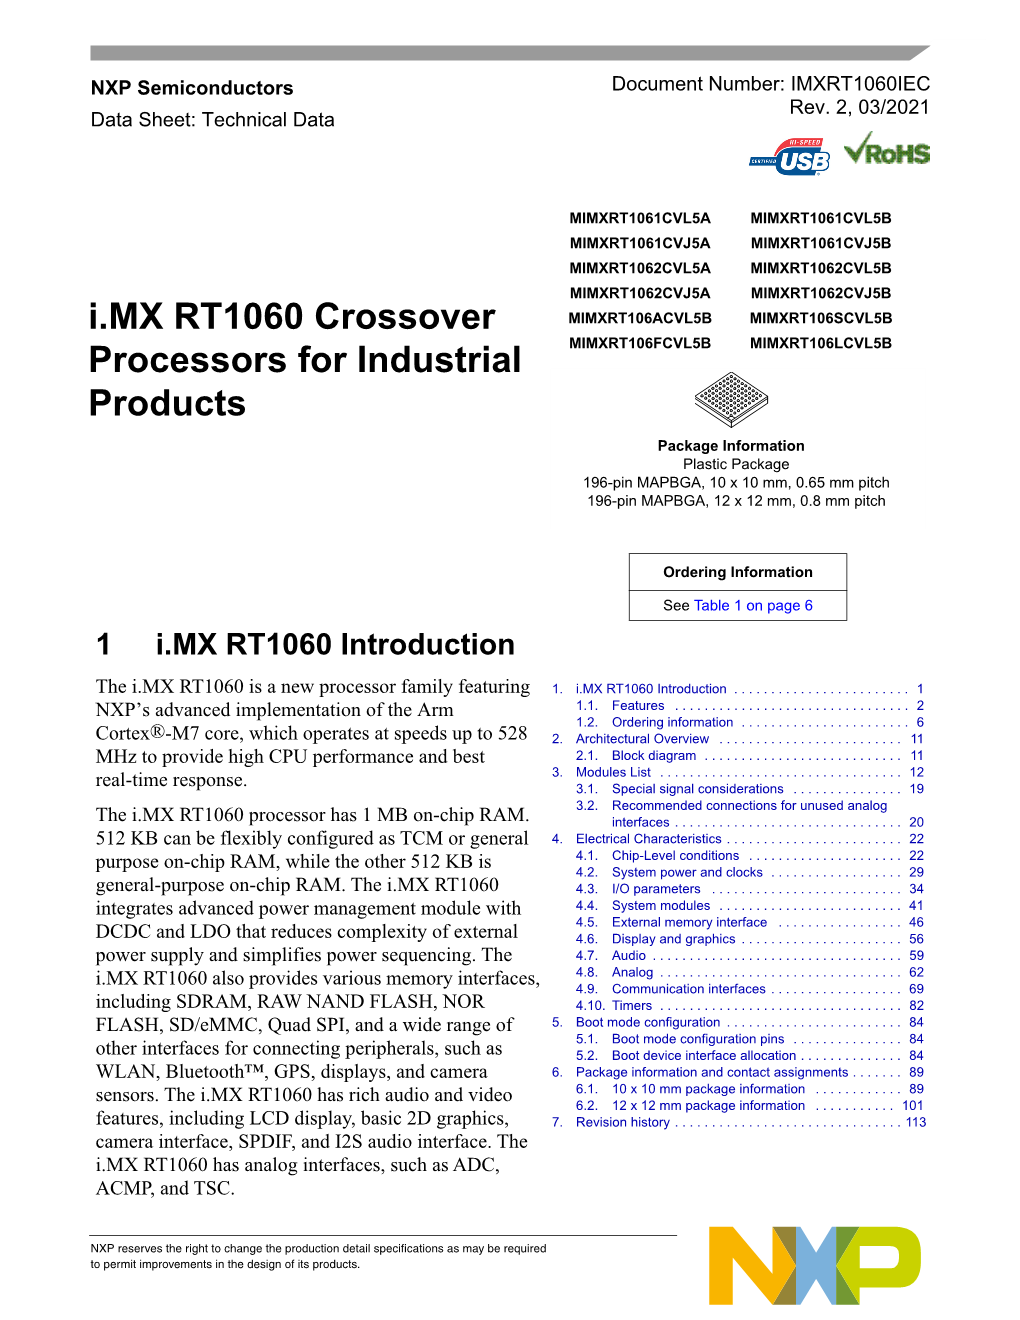 I.MX RT1060 Crossover Processors for Industrial Products, Rev